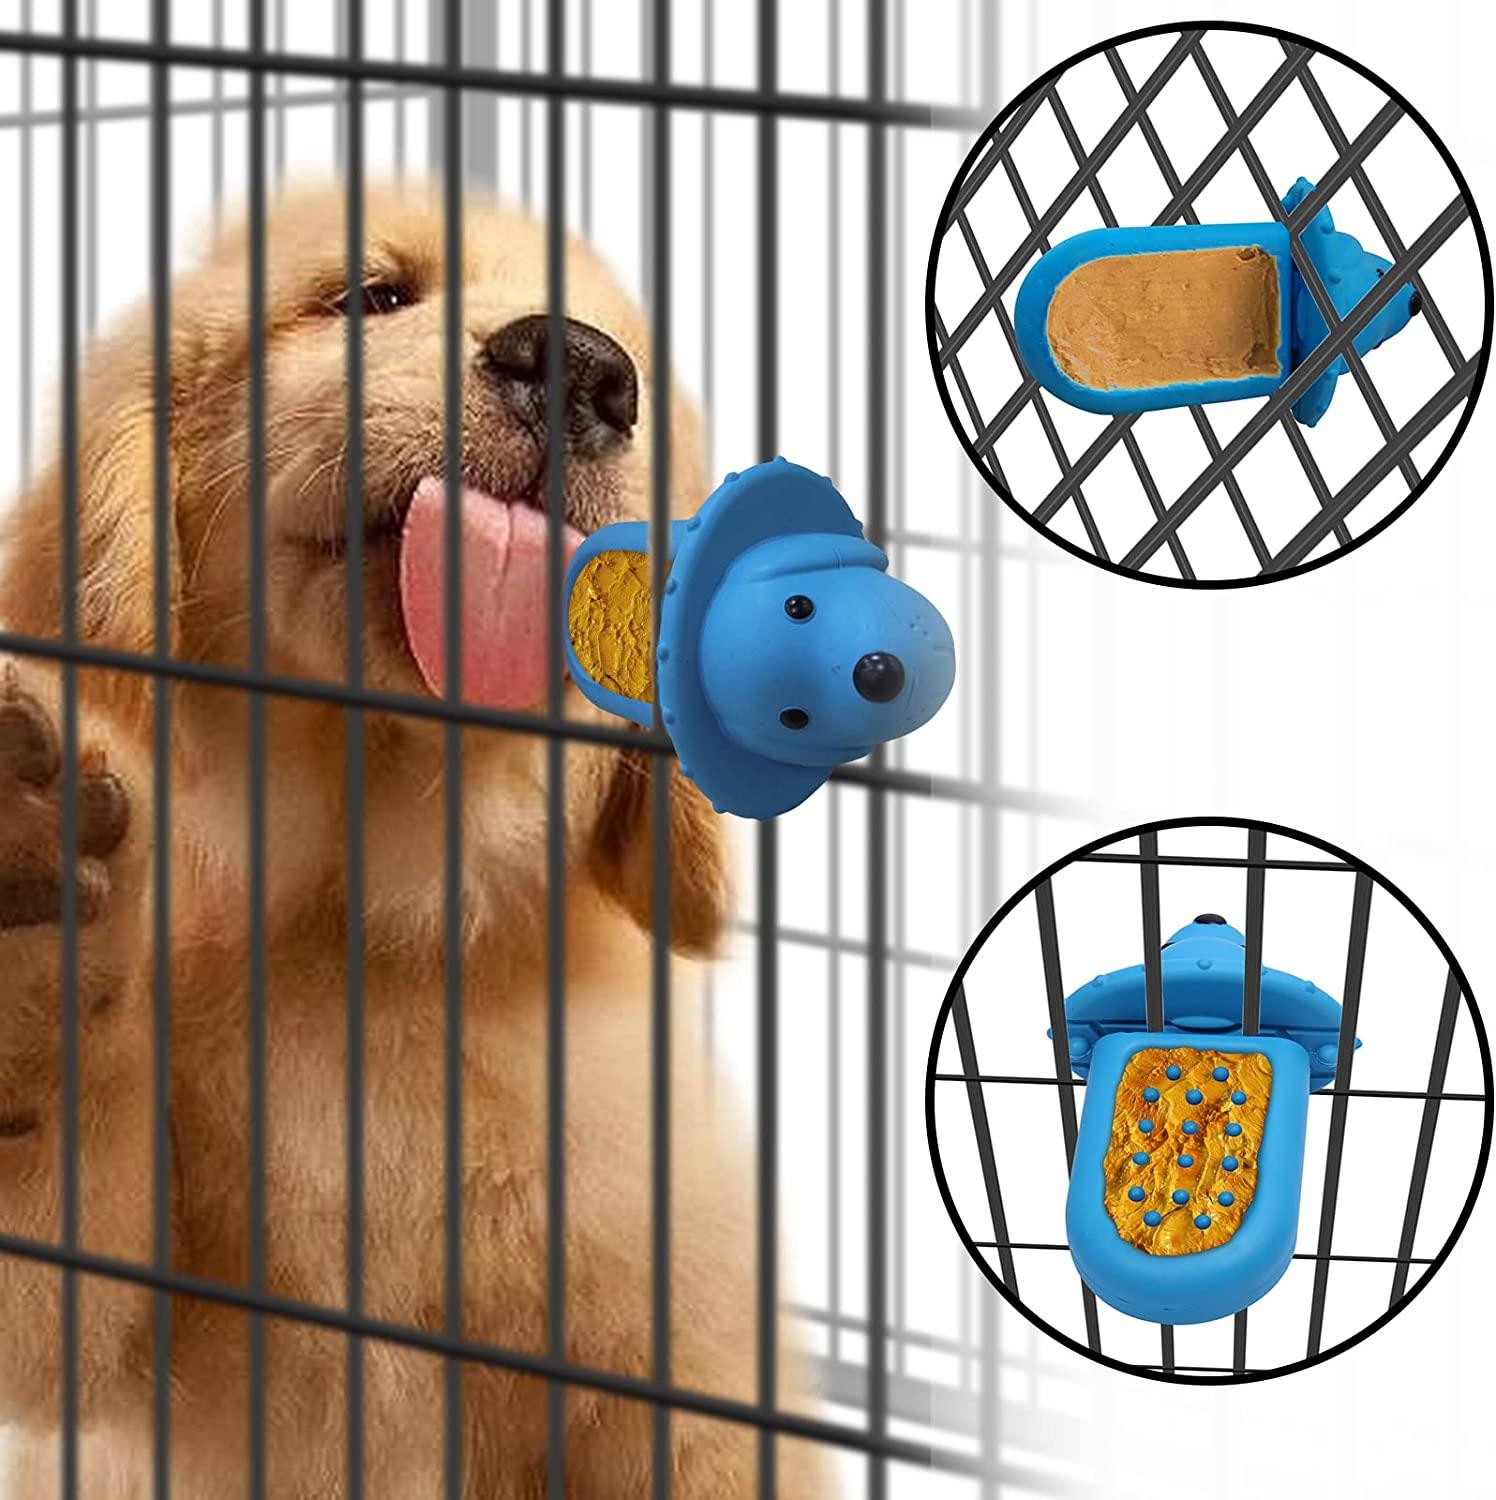 Dog Training Chew Toys/Crate Toys for Dogs,Dog Training Aid for Reduces  Anxiety/Barking,Dog Peanut Butter Licking Toy,Puppy Training/Teething  Cleaning